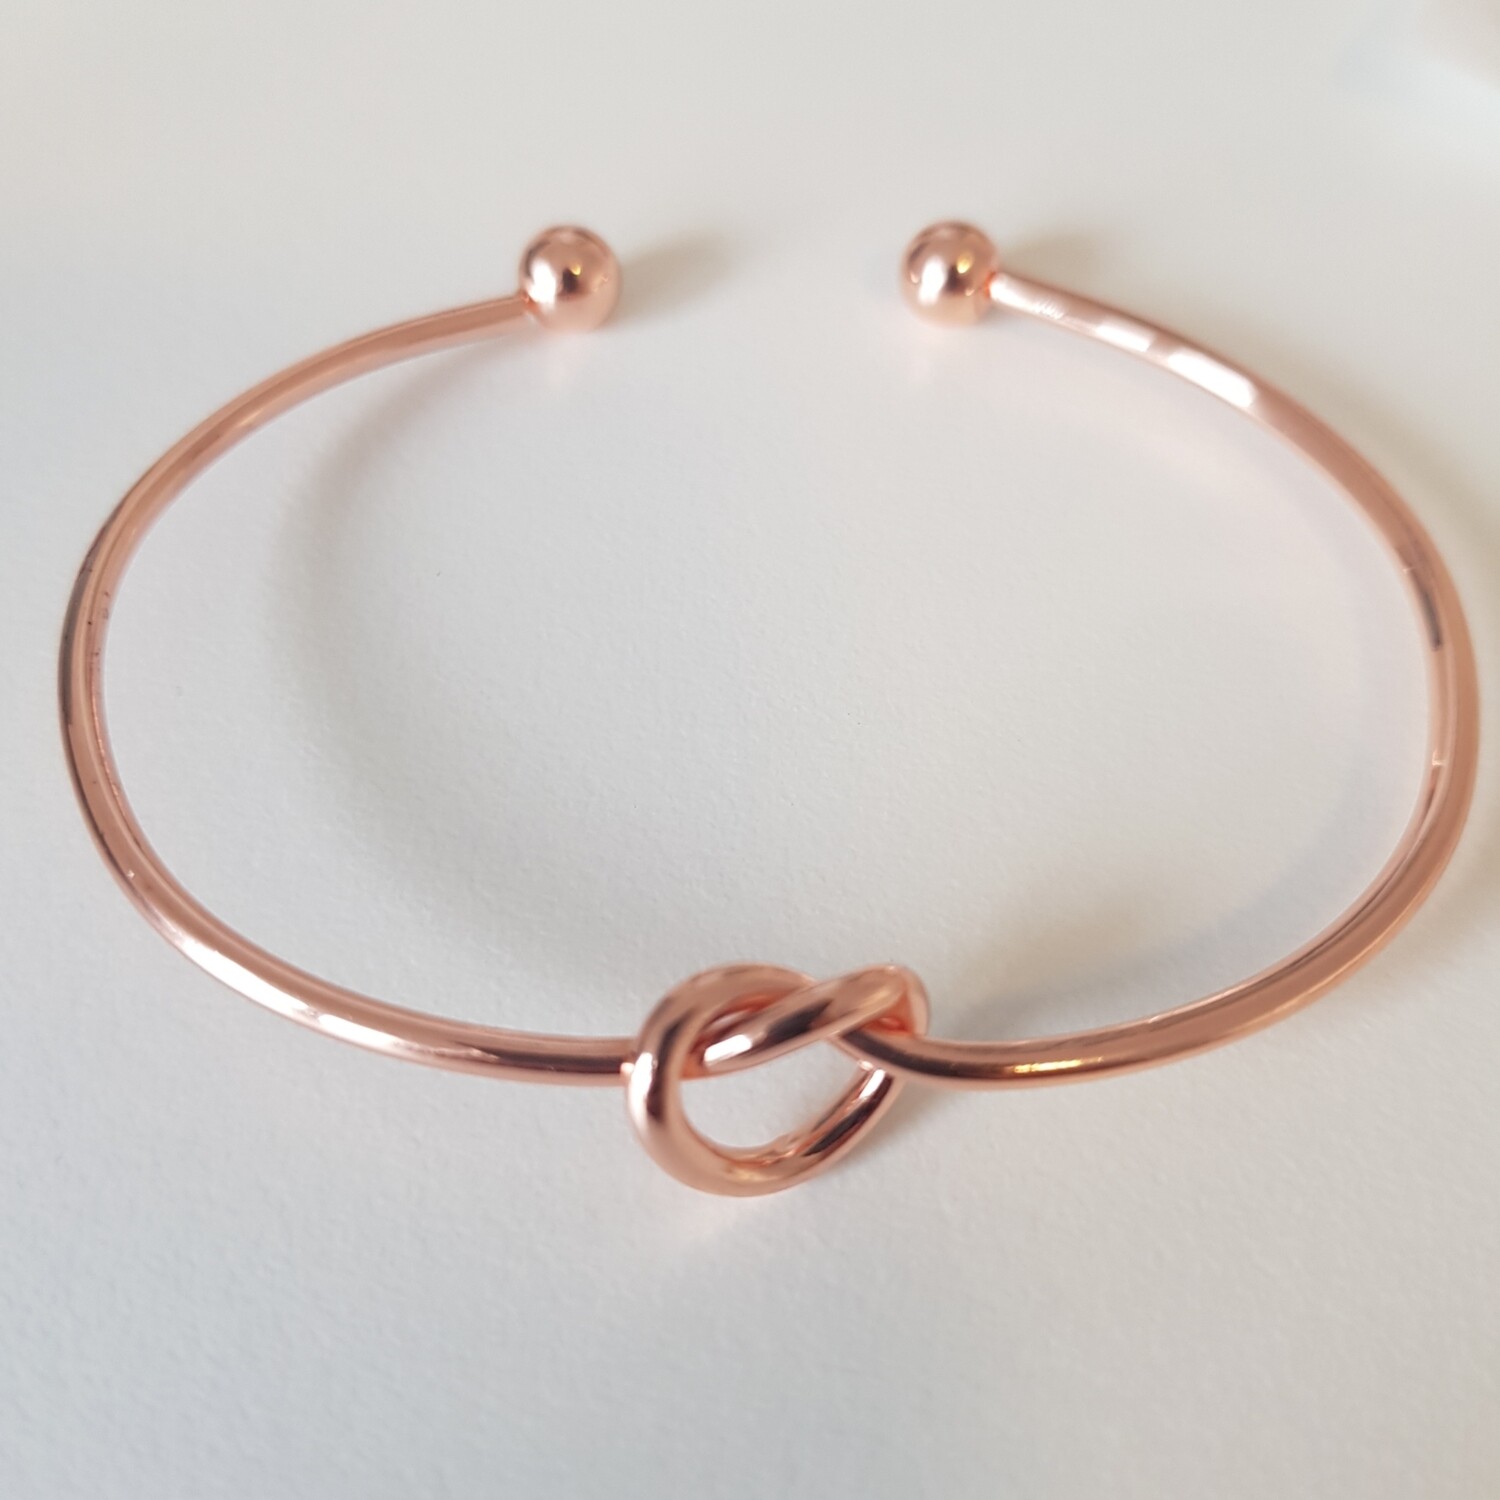 Knotted armband rosé goud